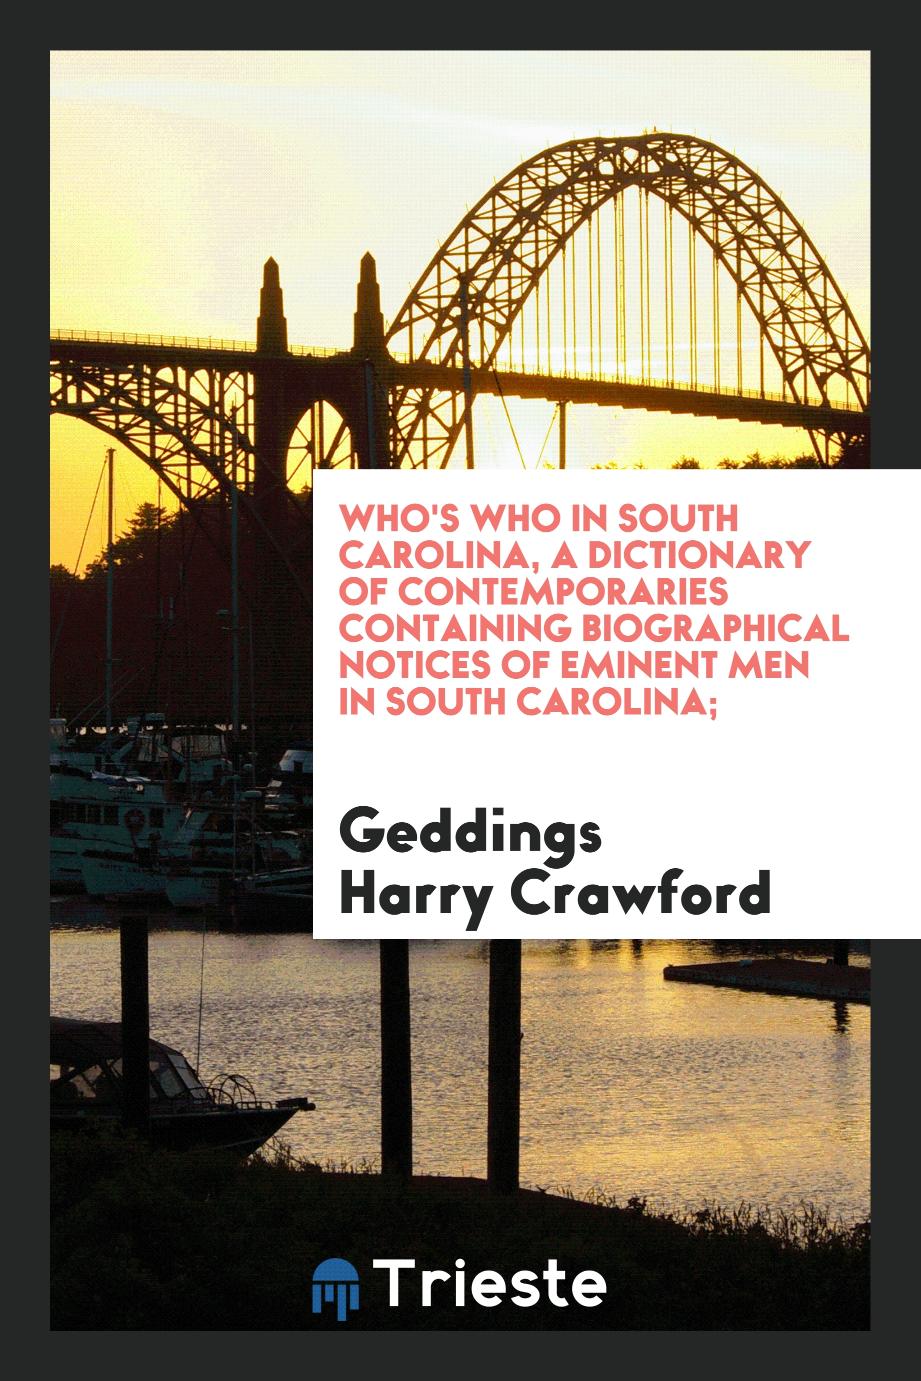 Who's who in South Carolina, a dictionary of contemporaries containing biographical notices of eminent men in South Carolina;